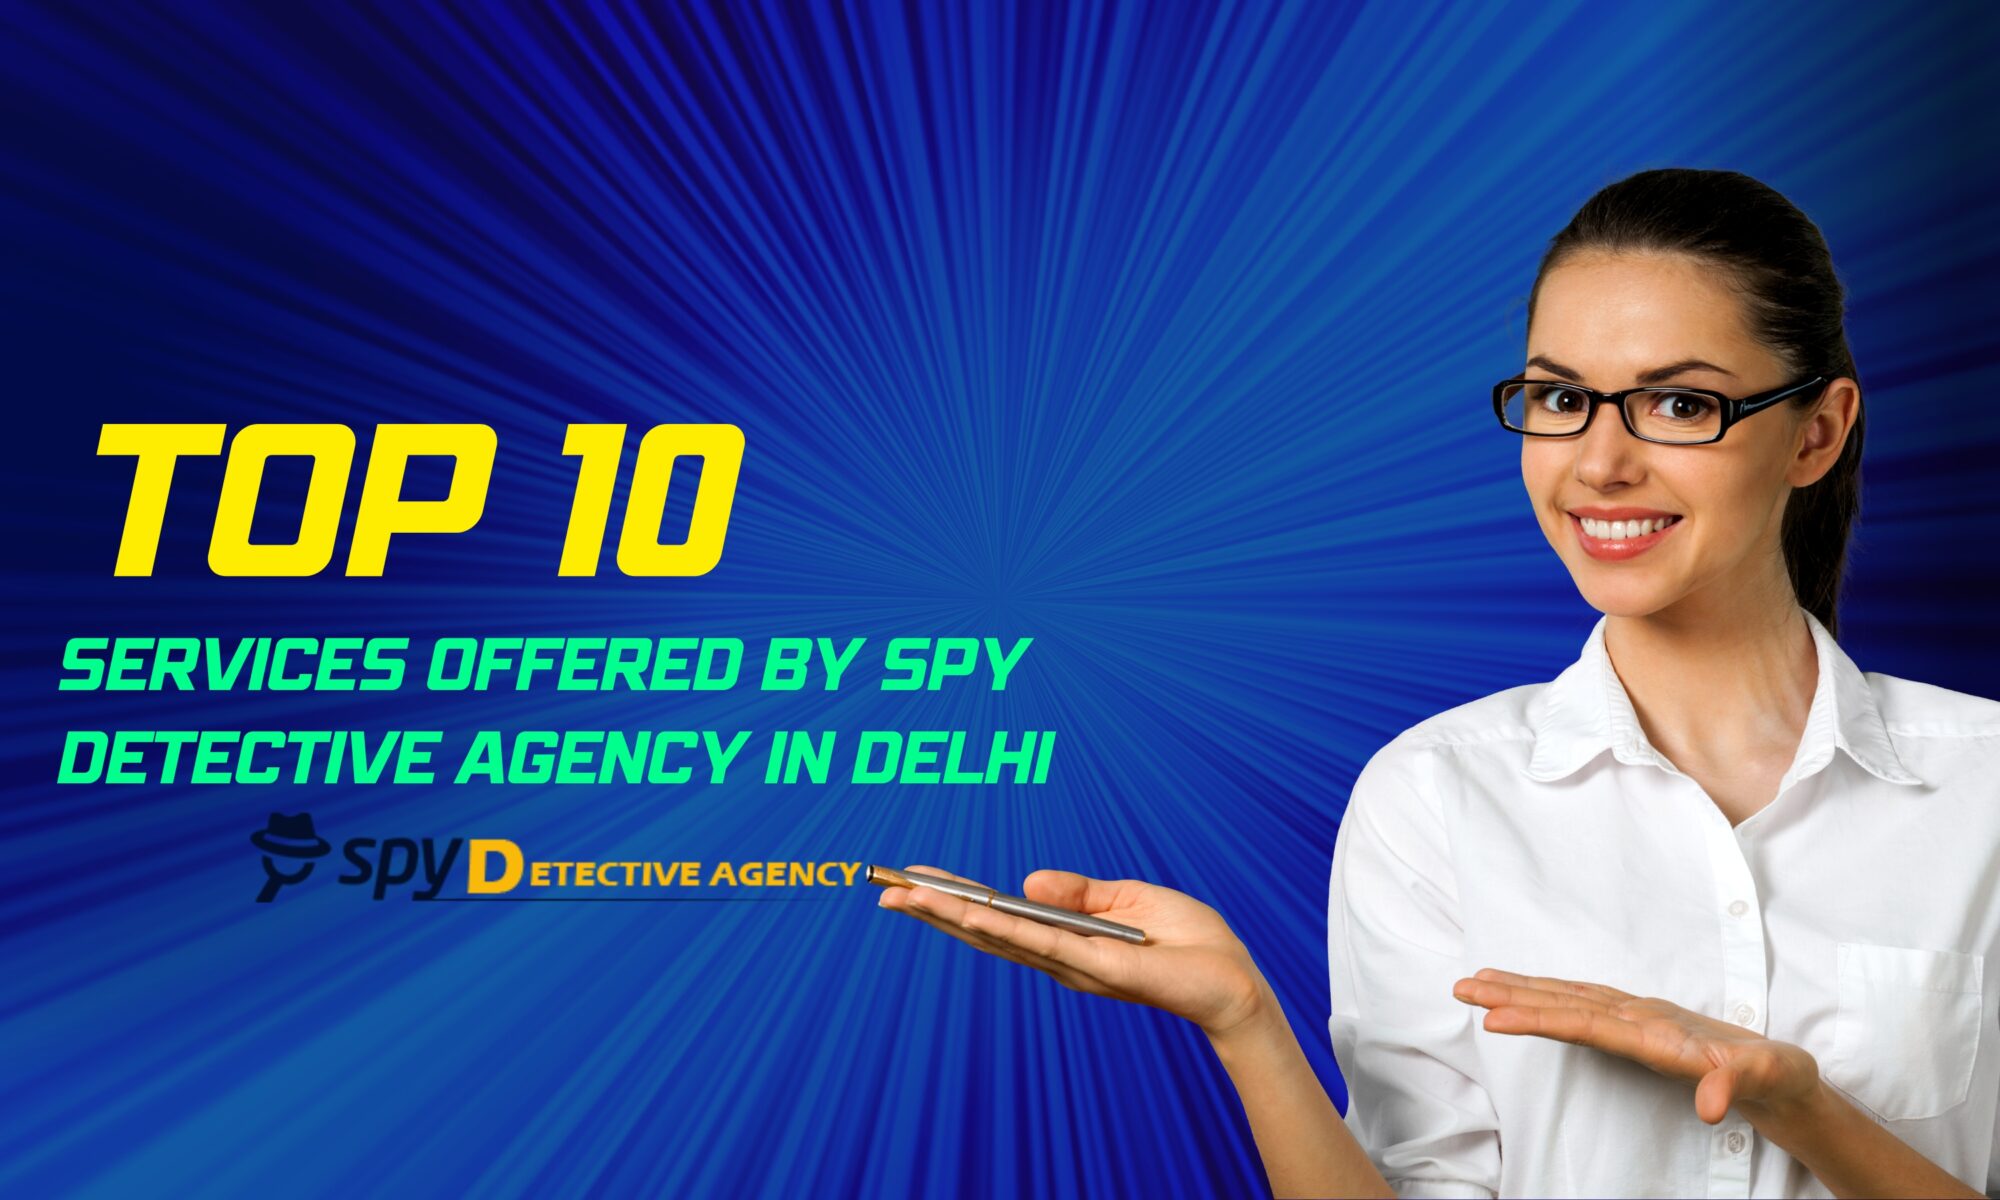 Top 10 Services Offered by Spy Detective Agency in Delhi